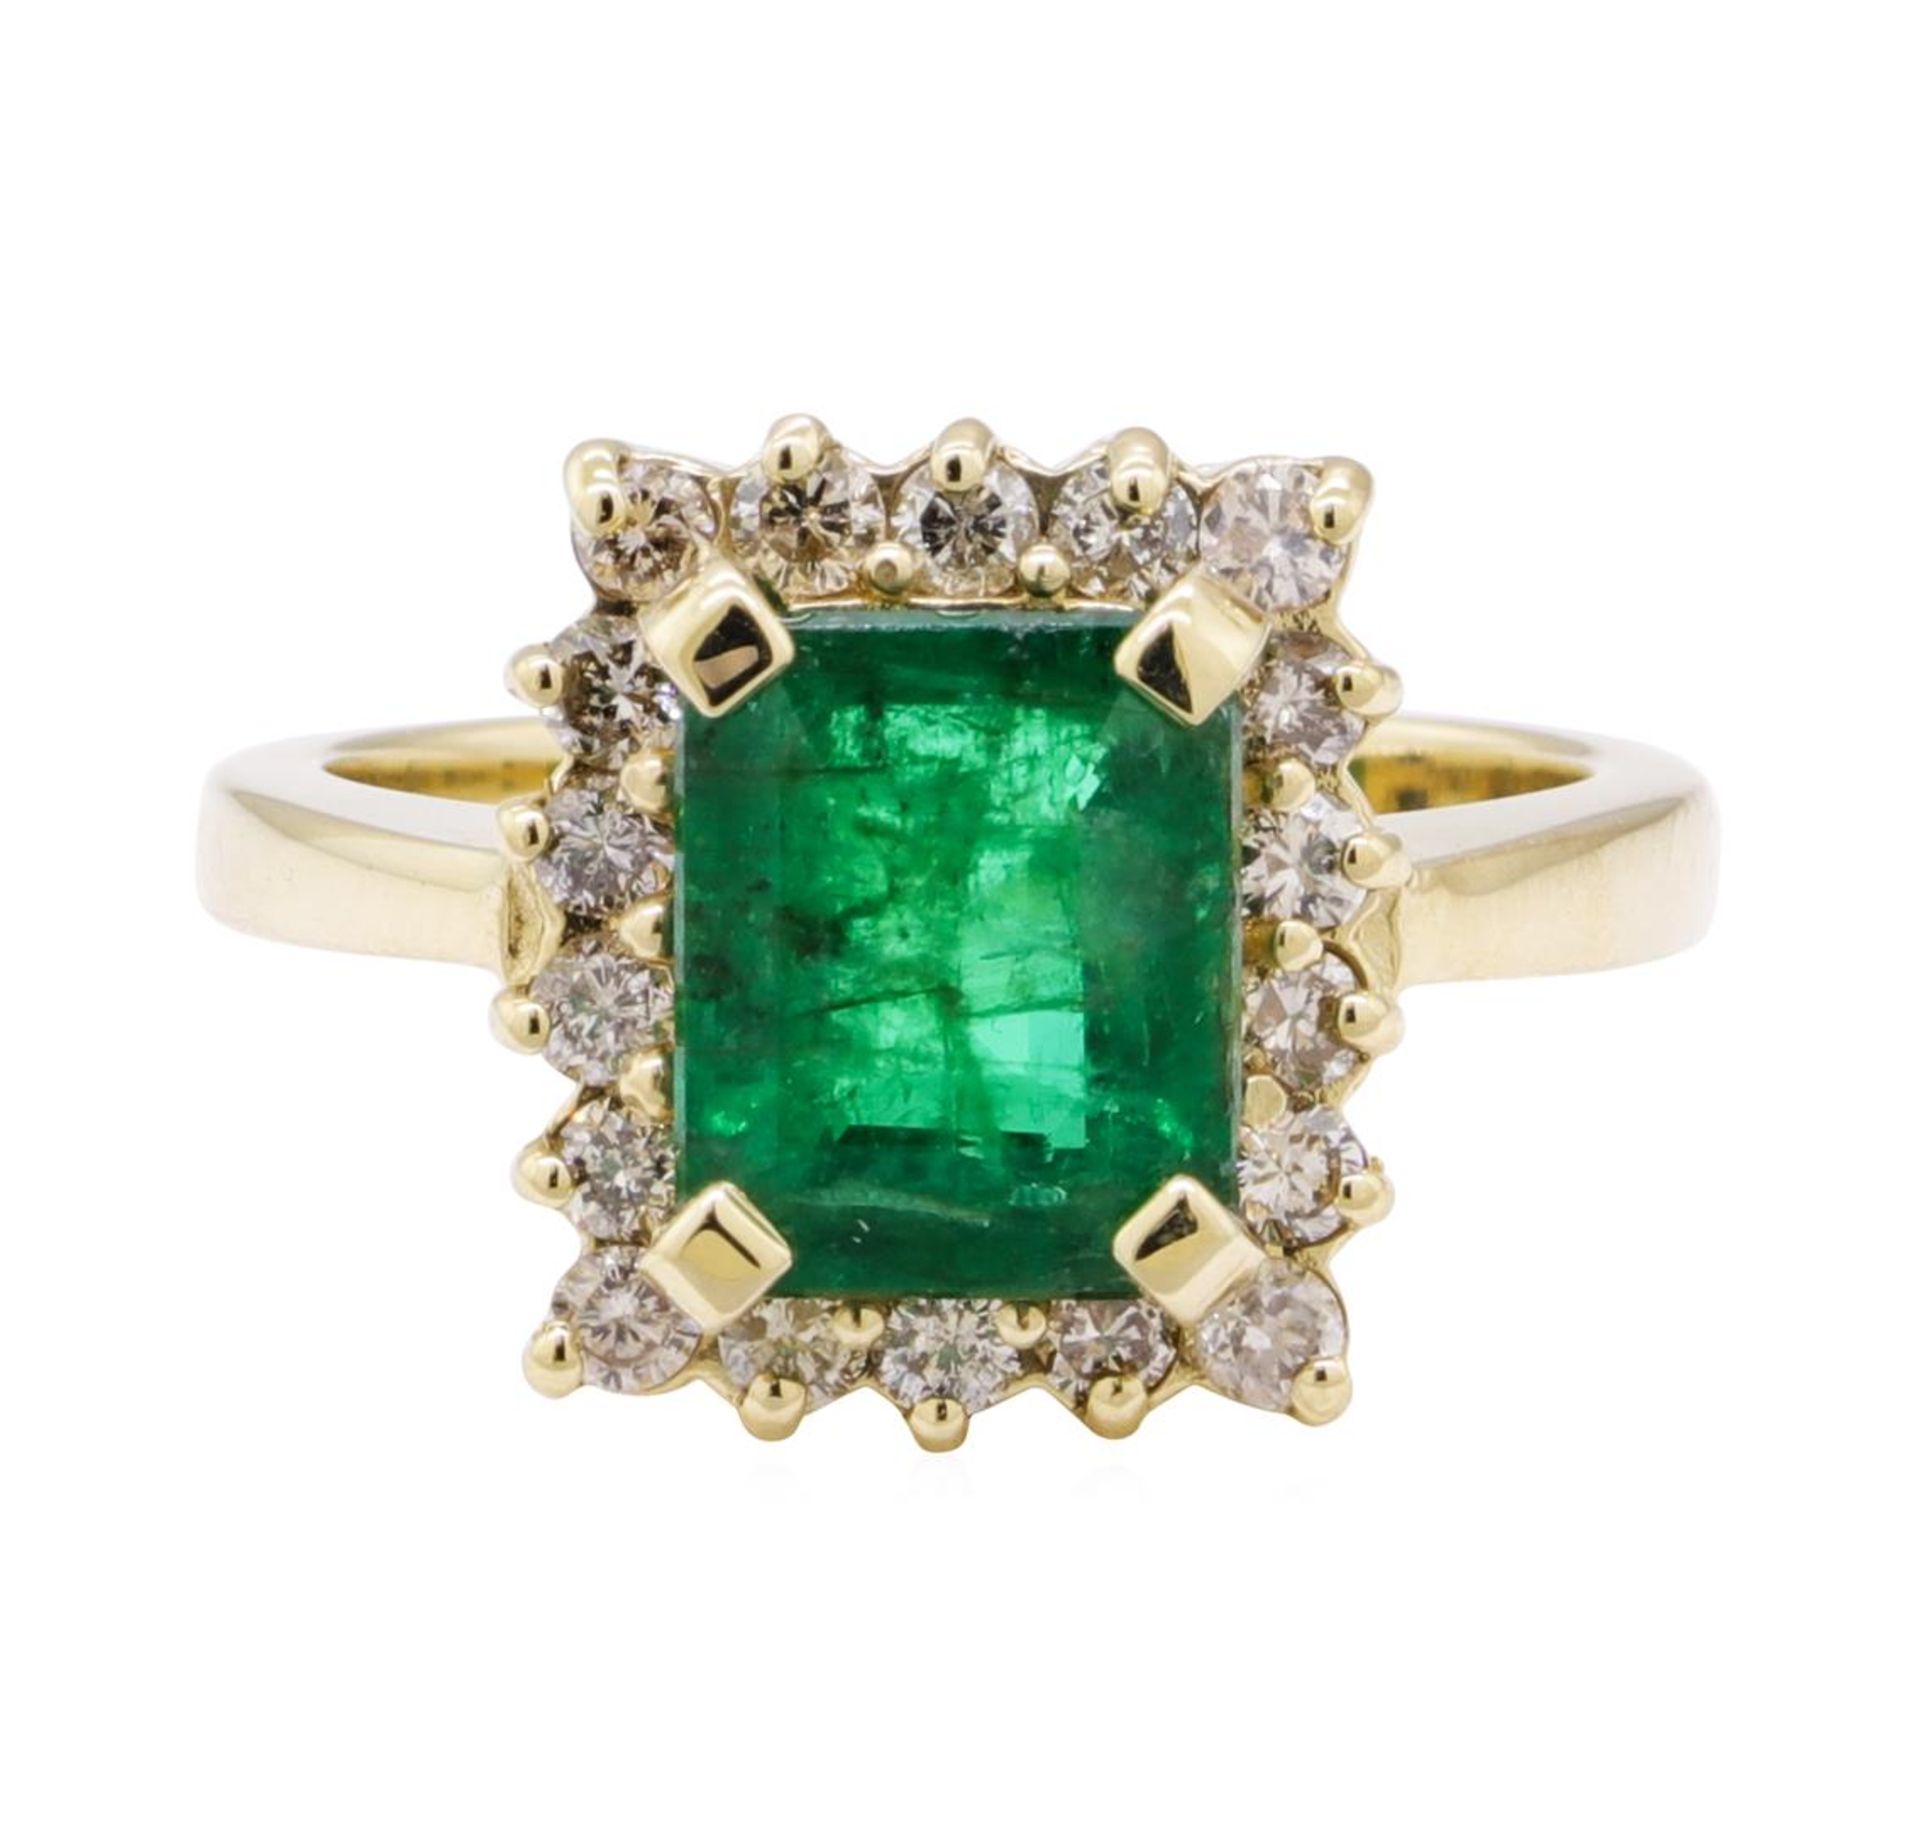 2.90ctw Emerald and Diamond Ring - 14KT Yellow Gold - Image 2 of 5